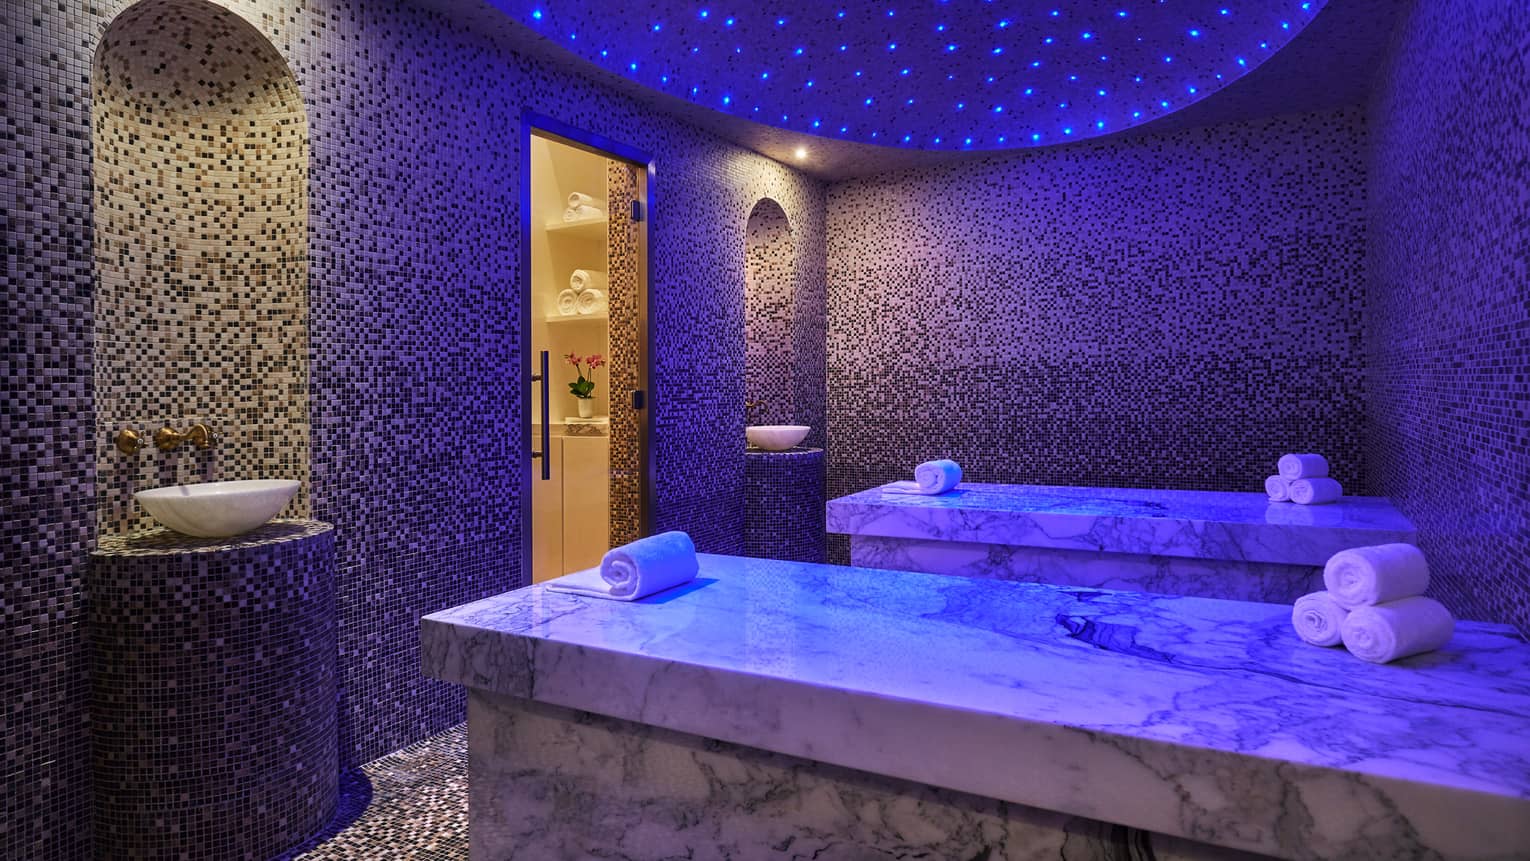 Two marble beds in private Hammam spa room with tiles, dome ceiling with small blue lights